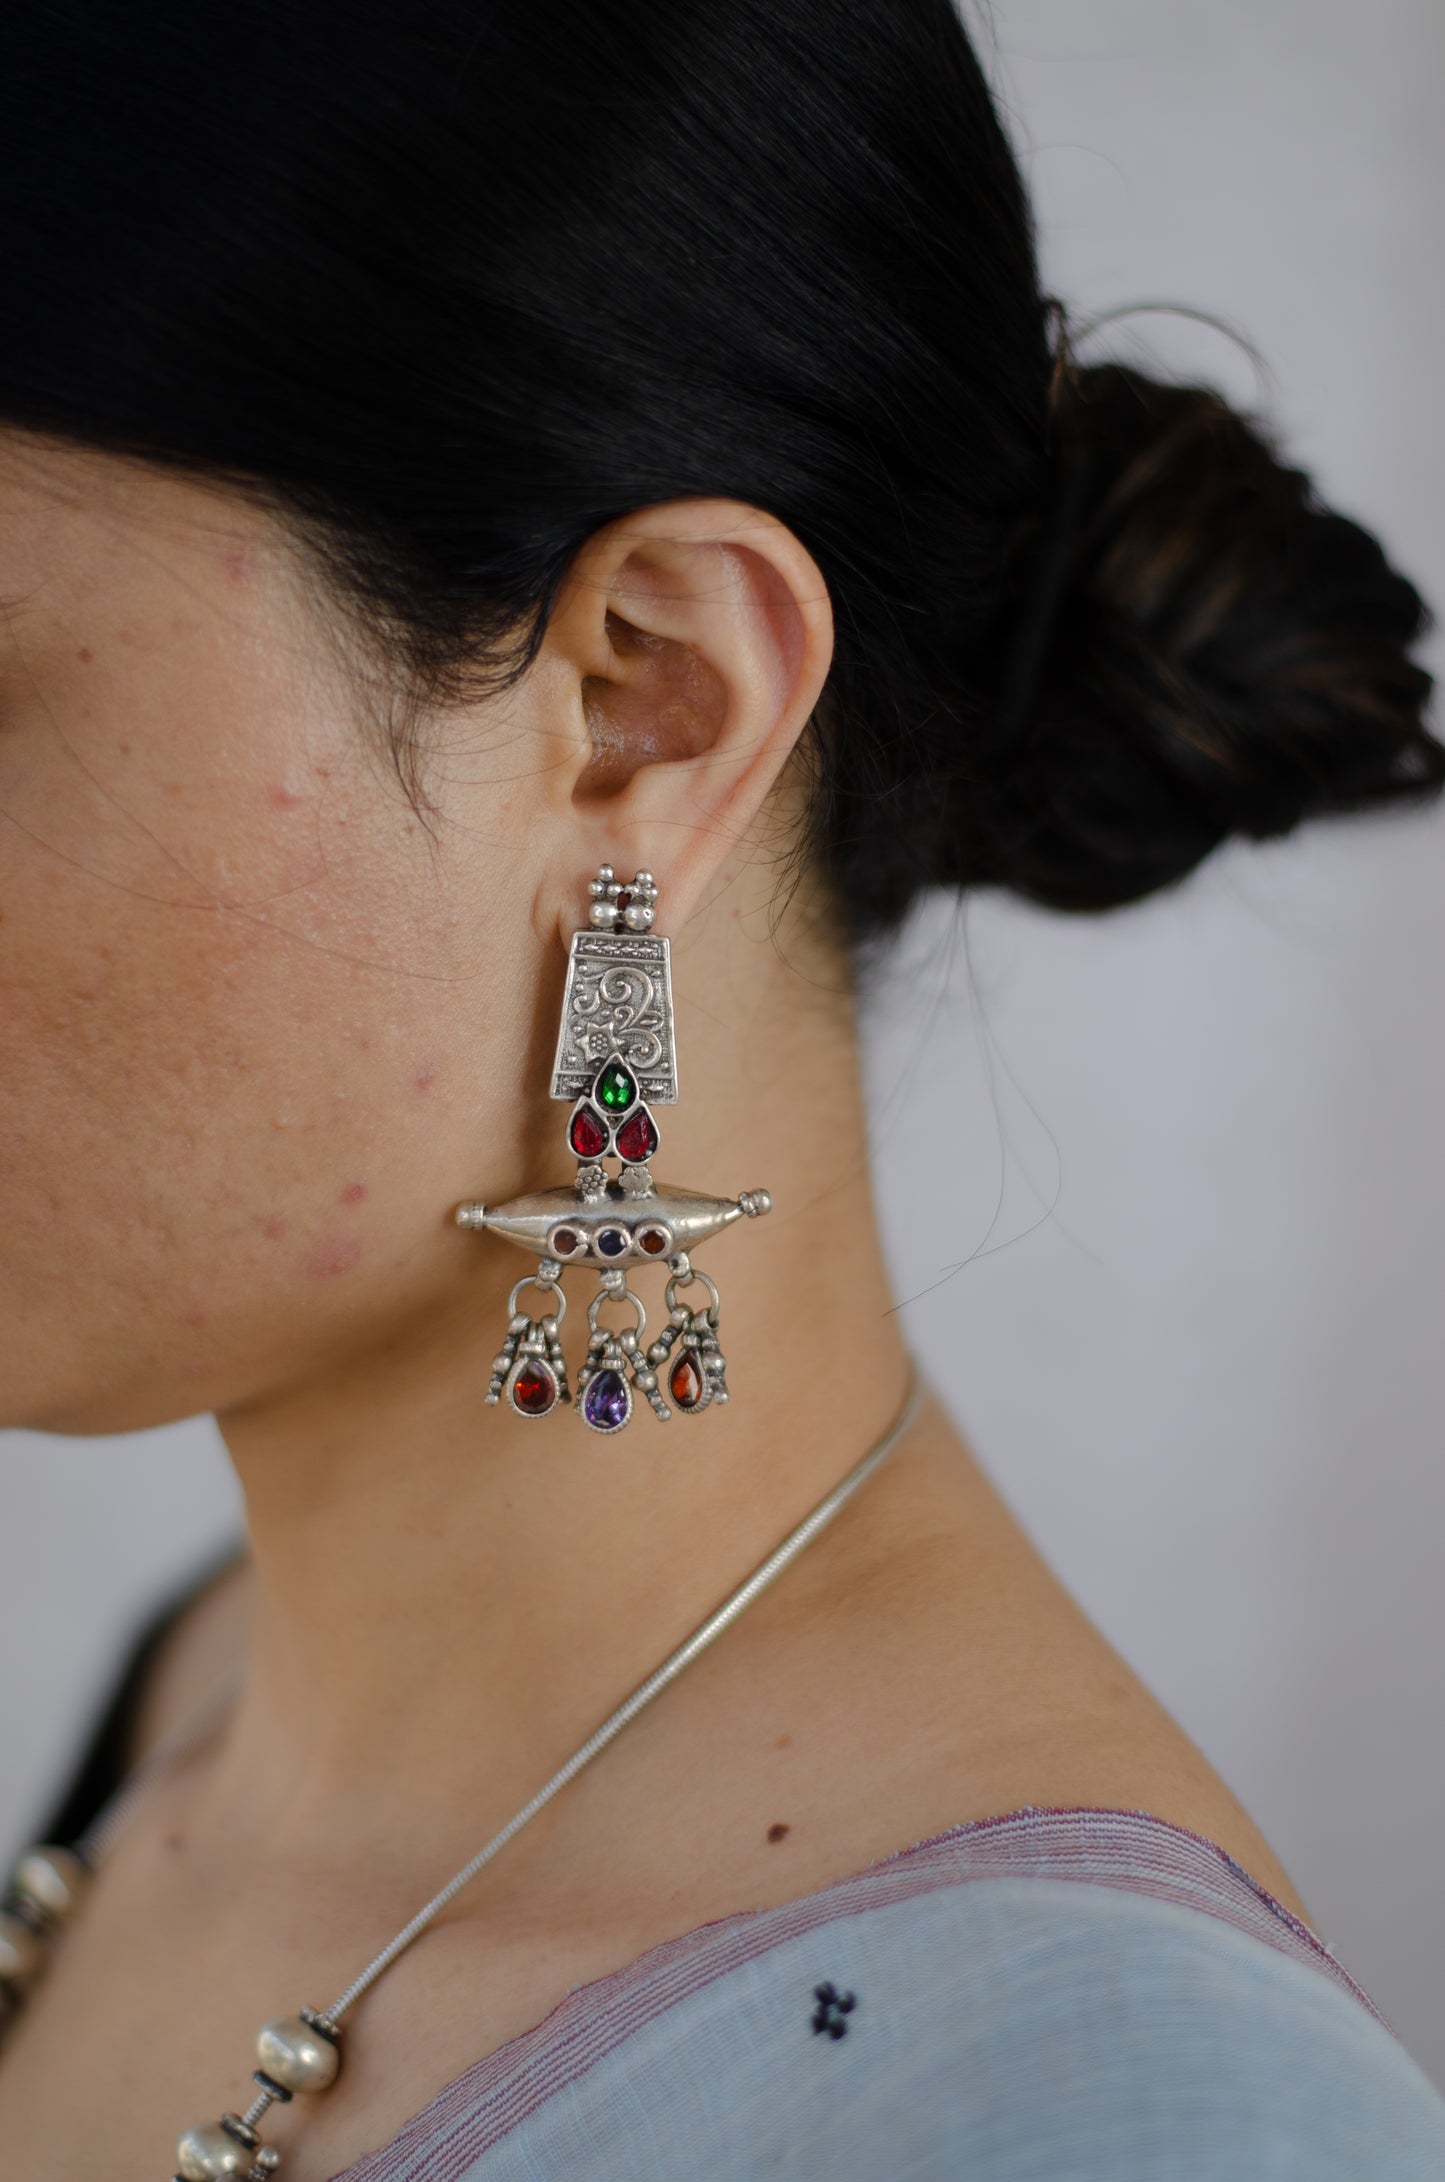 Handmade Silver tone earrings with stones.